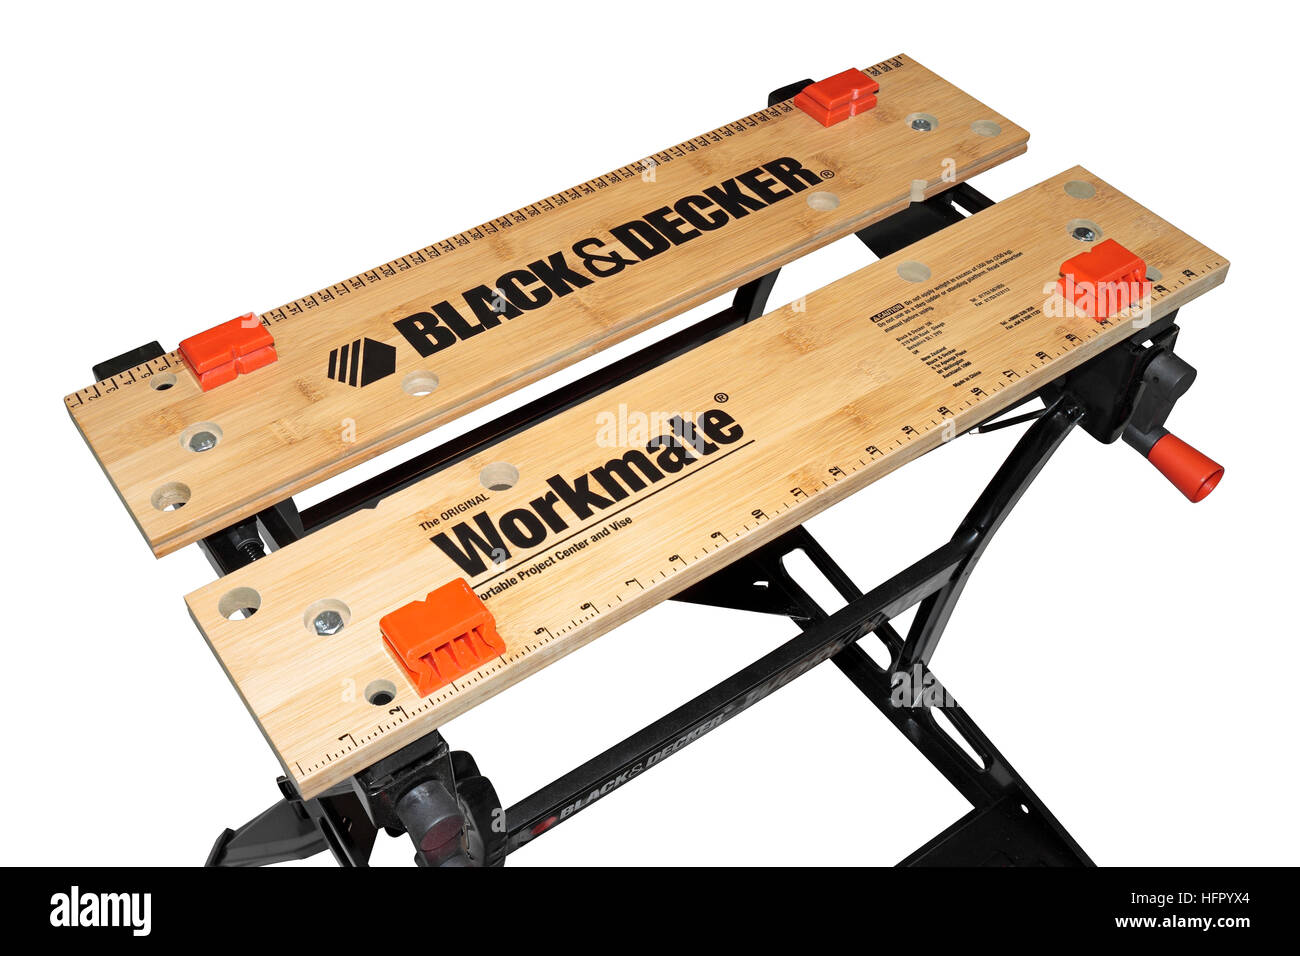 A Black and Decker Workmate work bench isolated on white background Stock Photo